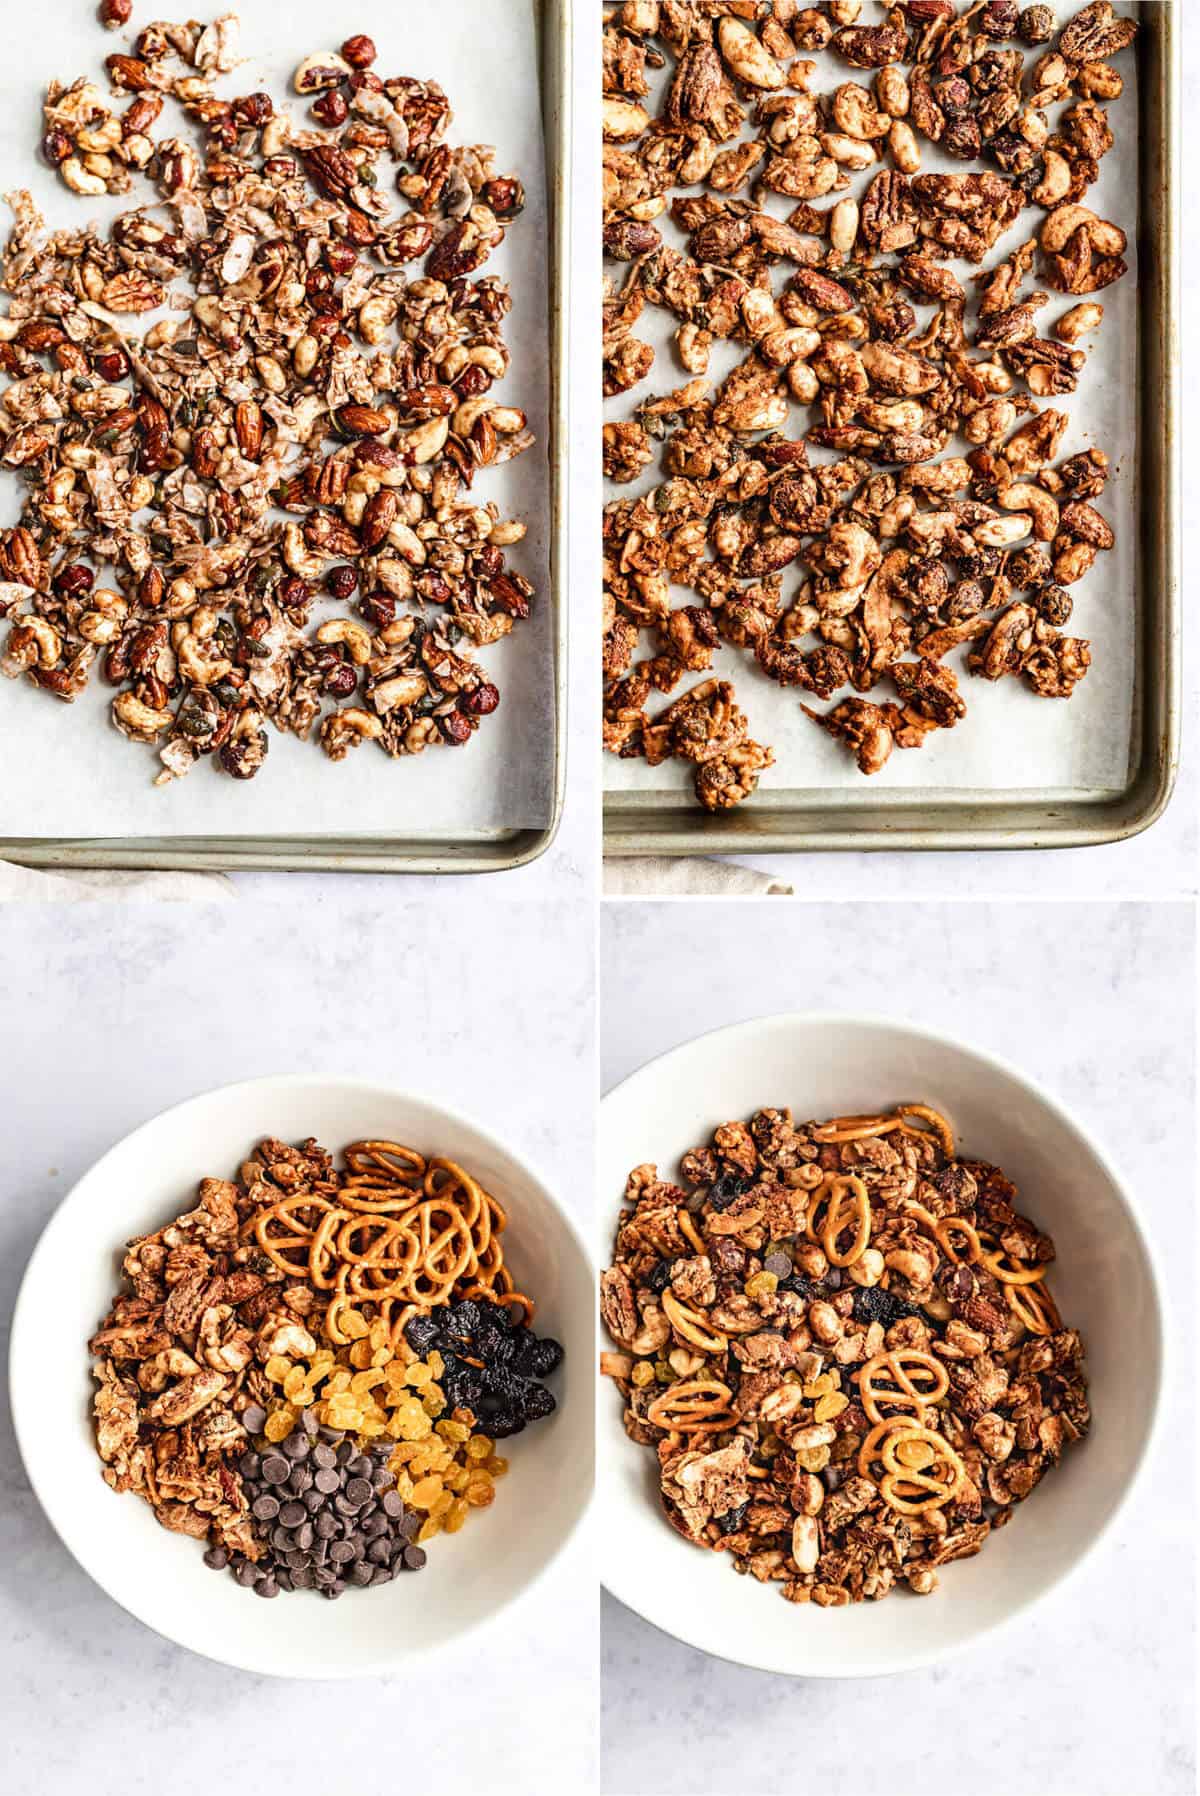 collage showing the process of baking and assembling the maple almond butter snack mix